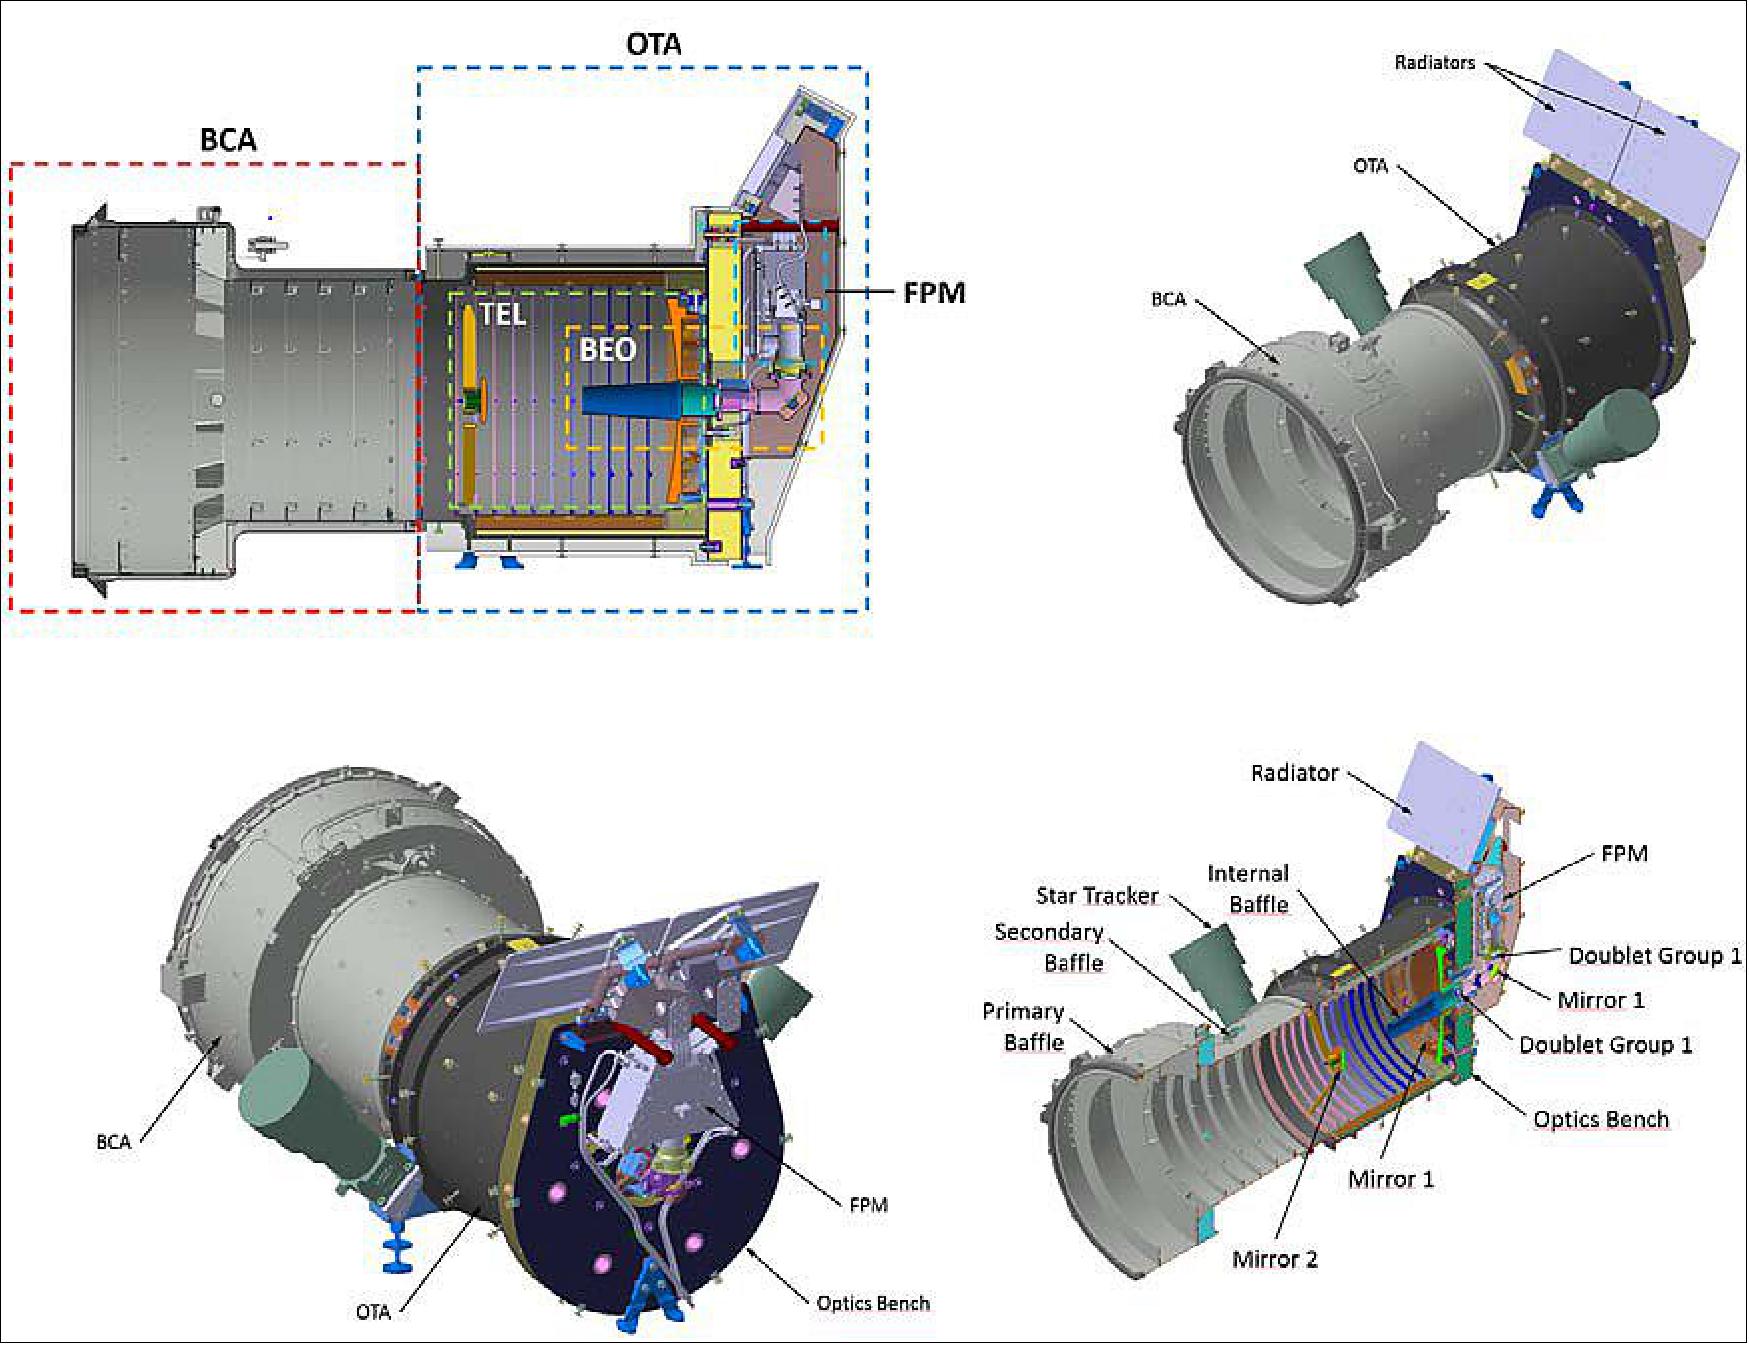 Figure 40: CAM/CAD pictures of the Baffle and Cover Assembly (BCA) and Optical Telescope Assembly (OTA), image credit: University of Bern, ESA)